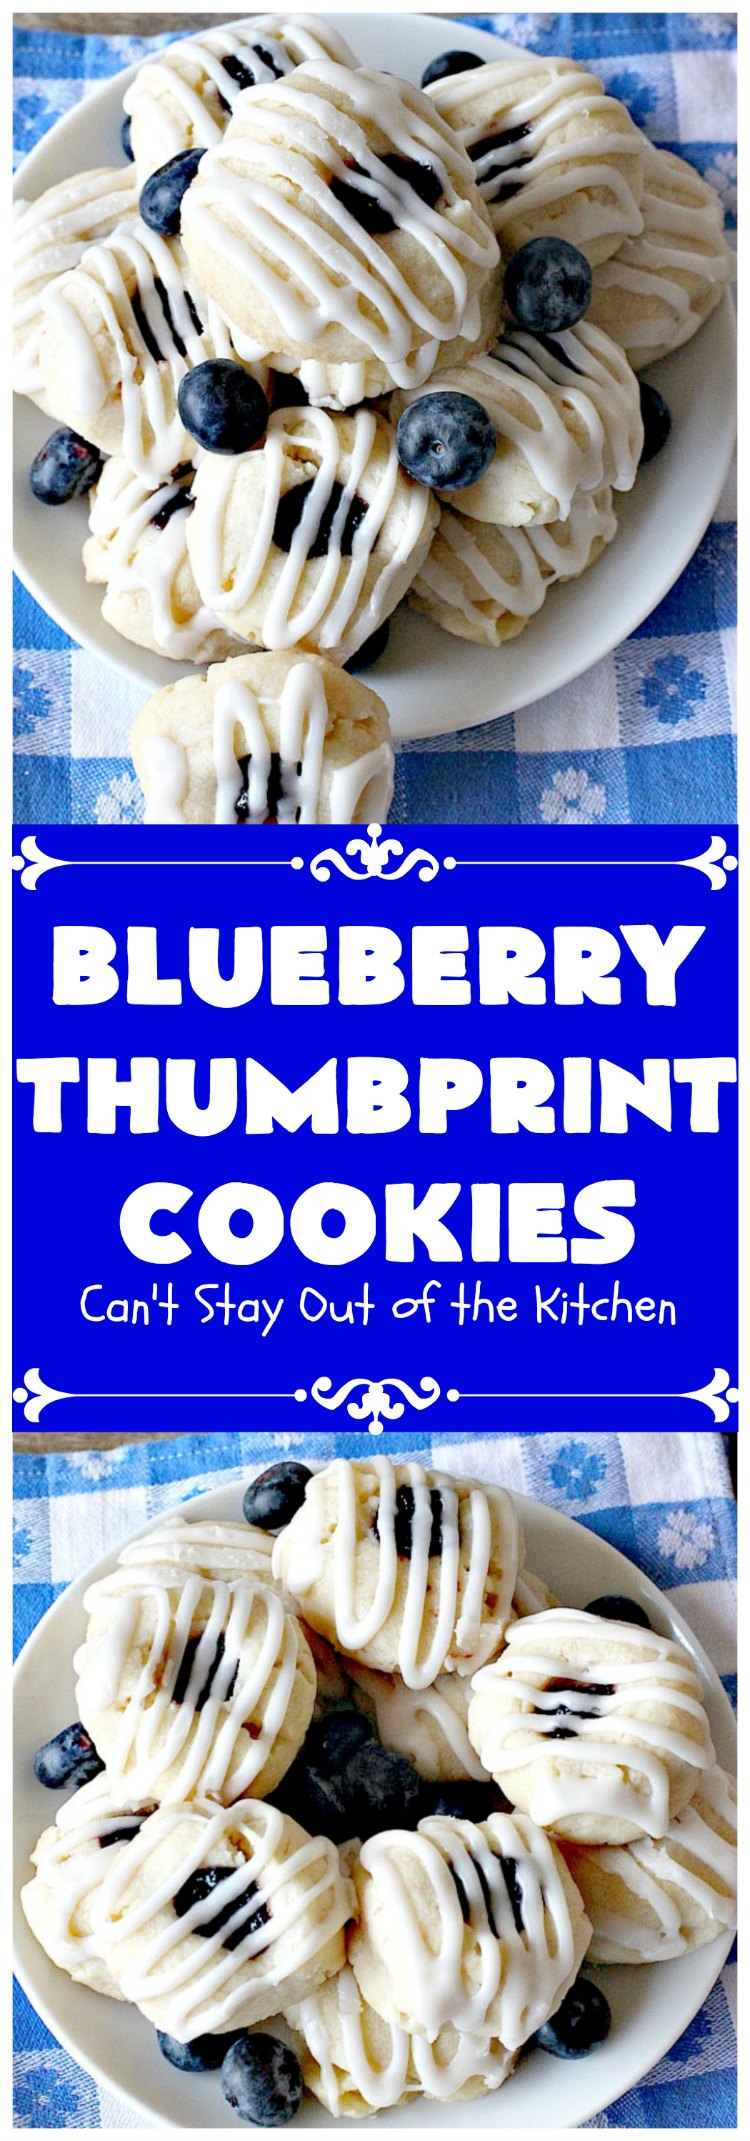 Blueberry Thumbprint Cookies | Can't Stay Out of the Kitchen